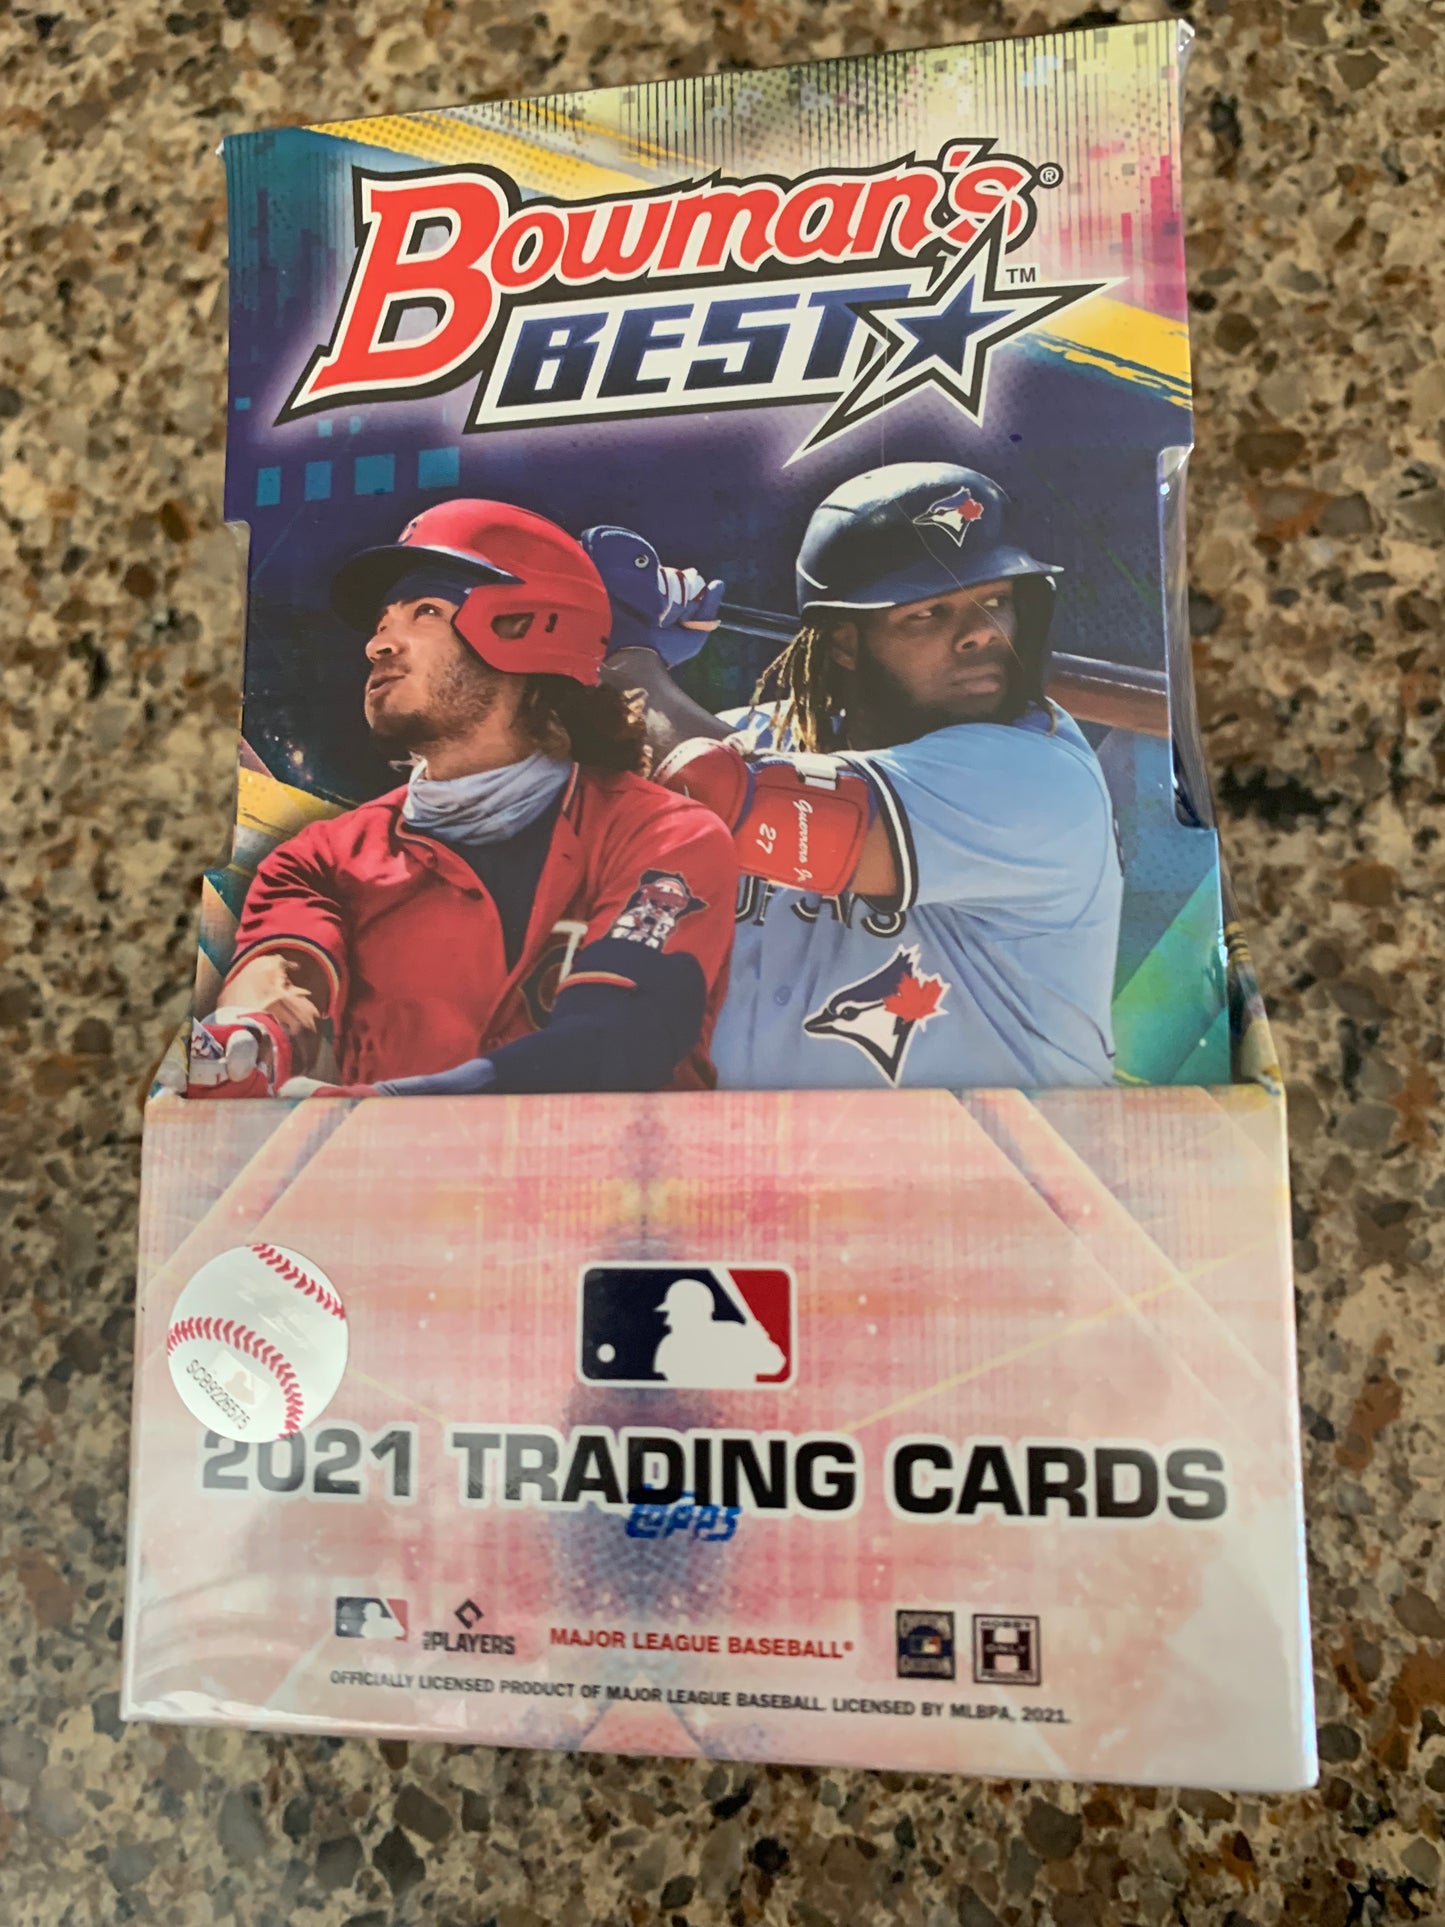 2021 Bowman's Best Baseball Hobby Pack - wander franco Auto RC?! this listing is for a single pack